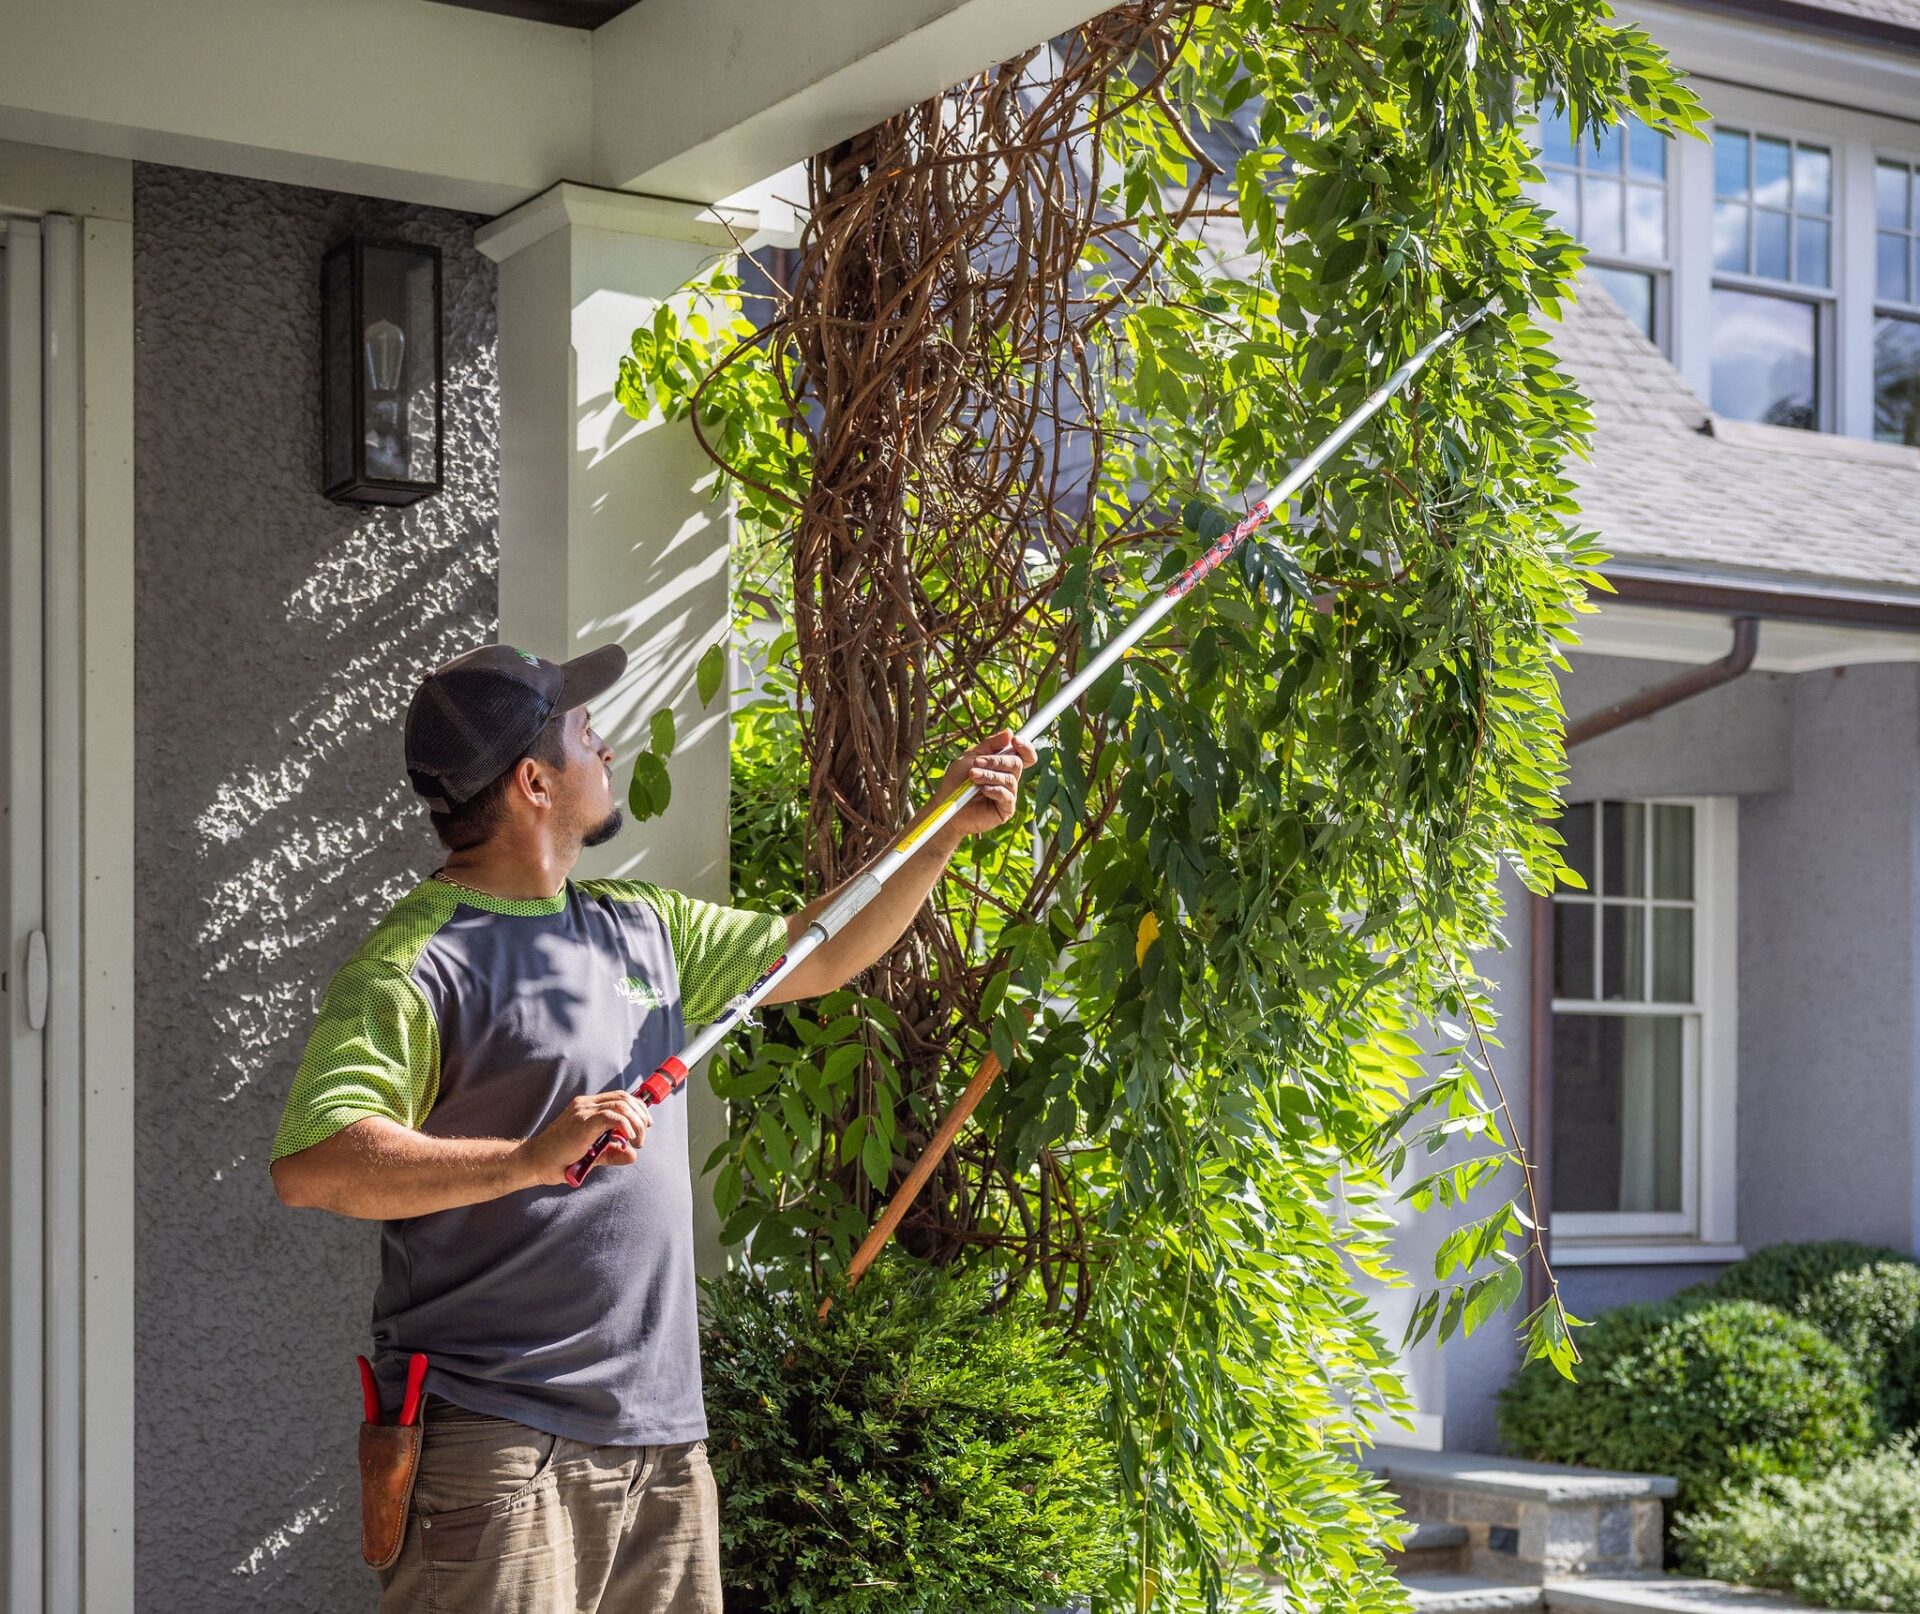 A person in a cap and casual clothing is trimming a tall shrub with long-handled pruning shears beside a house on a sunny day.